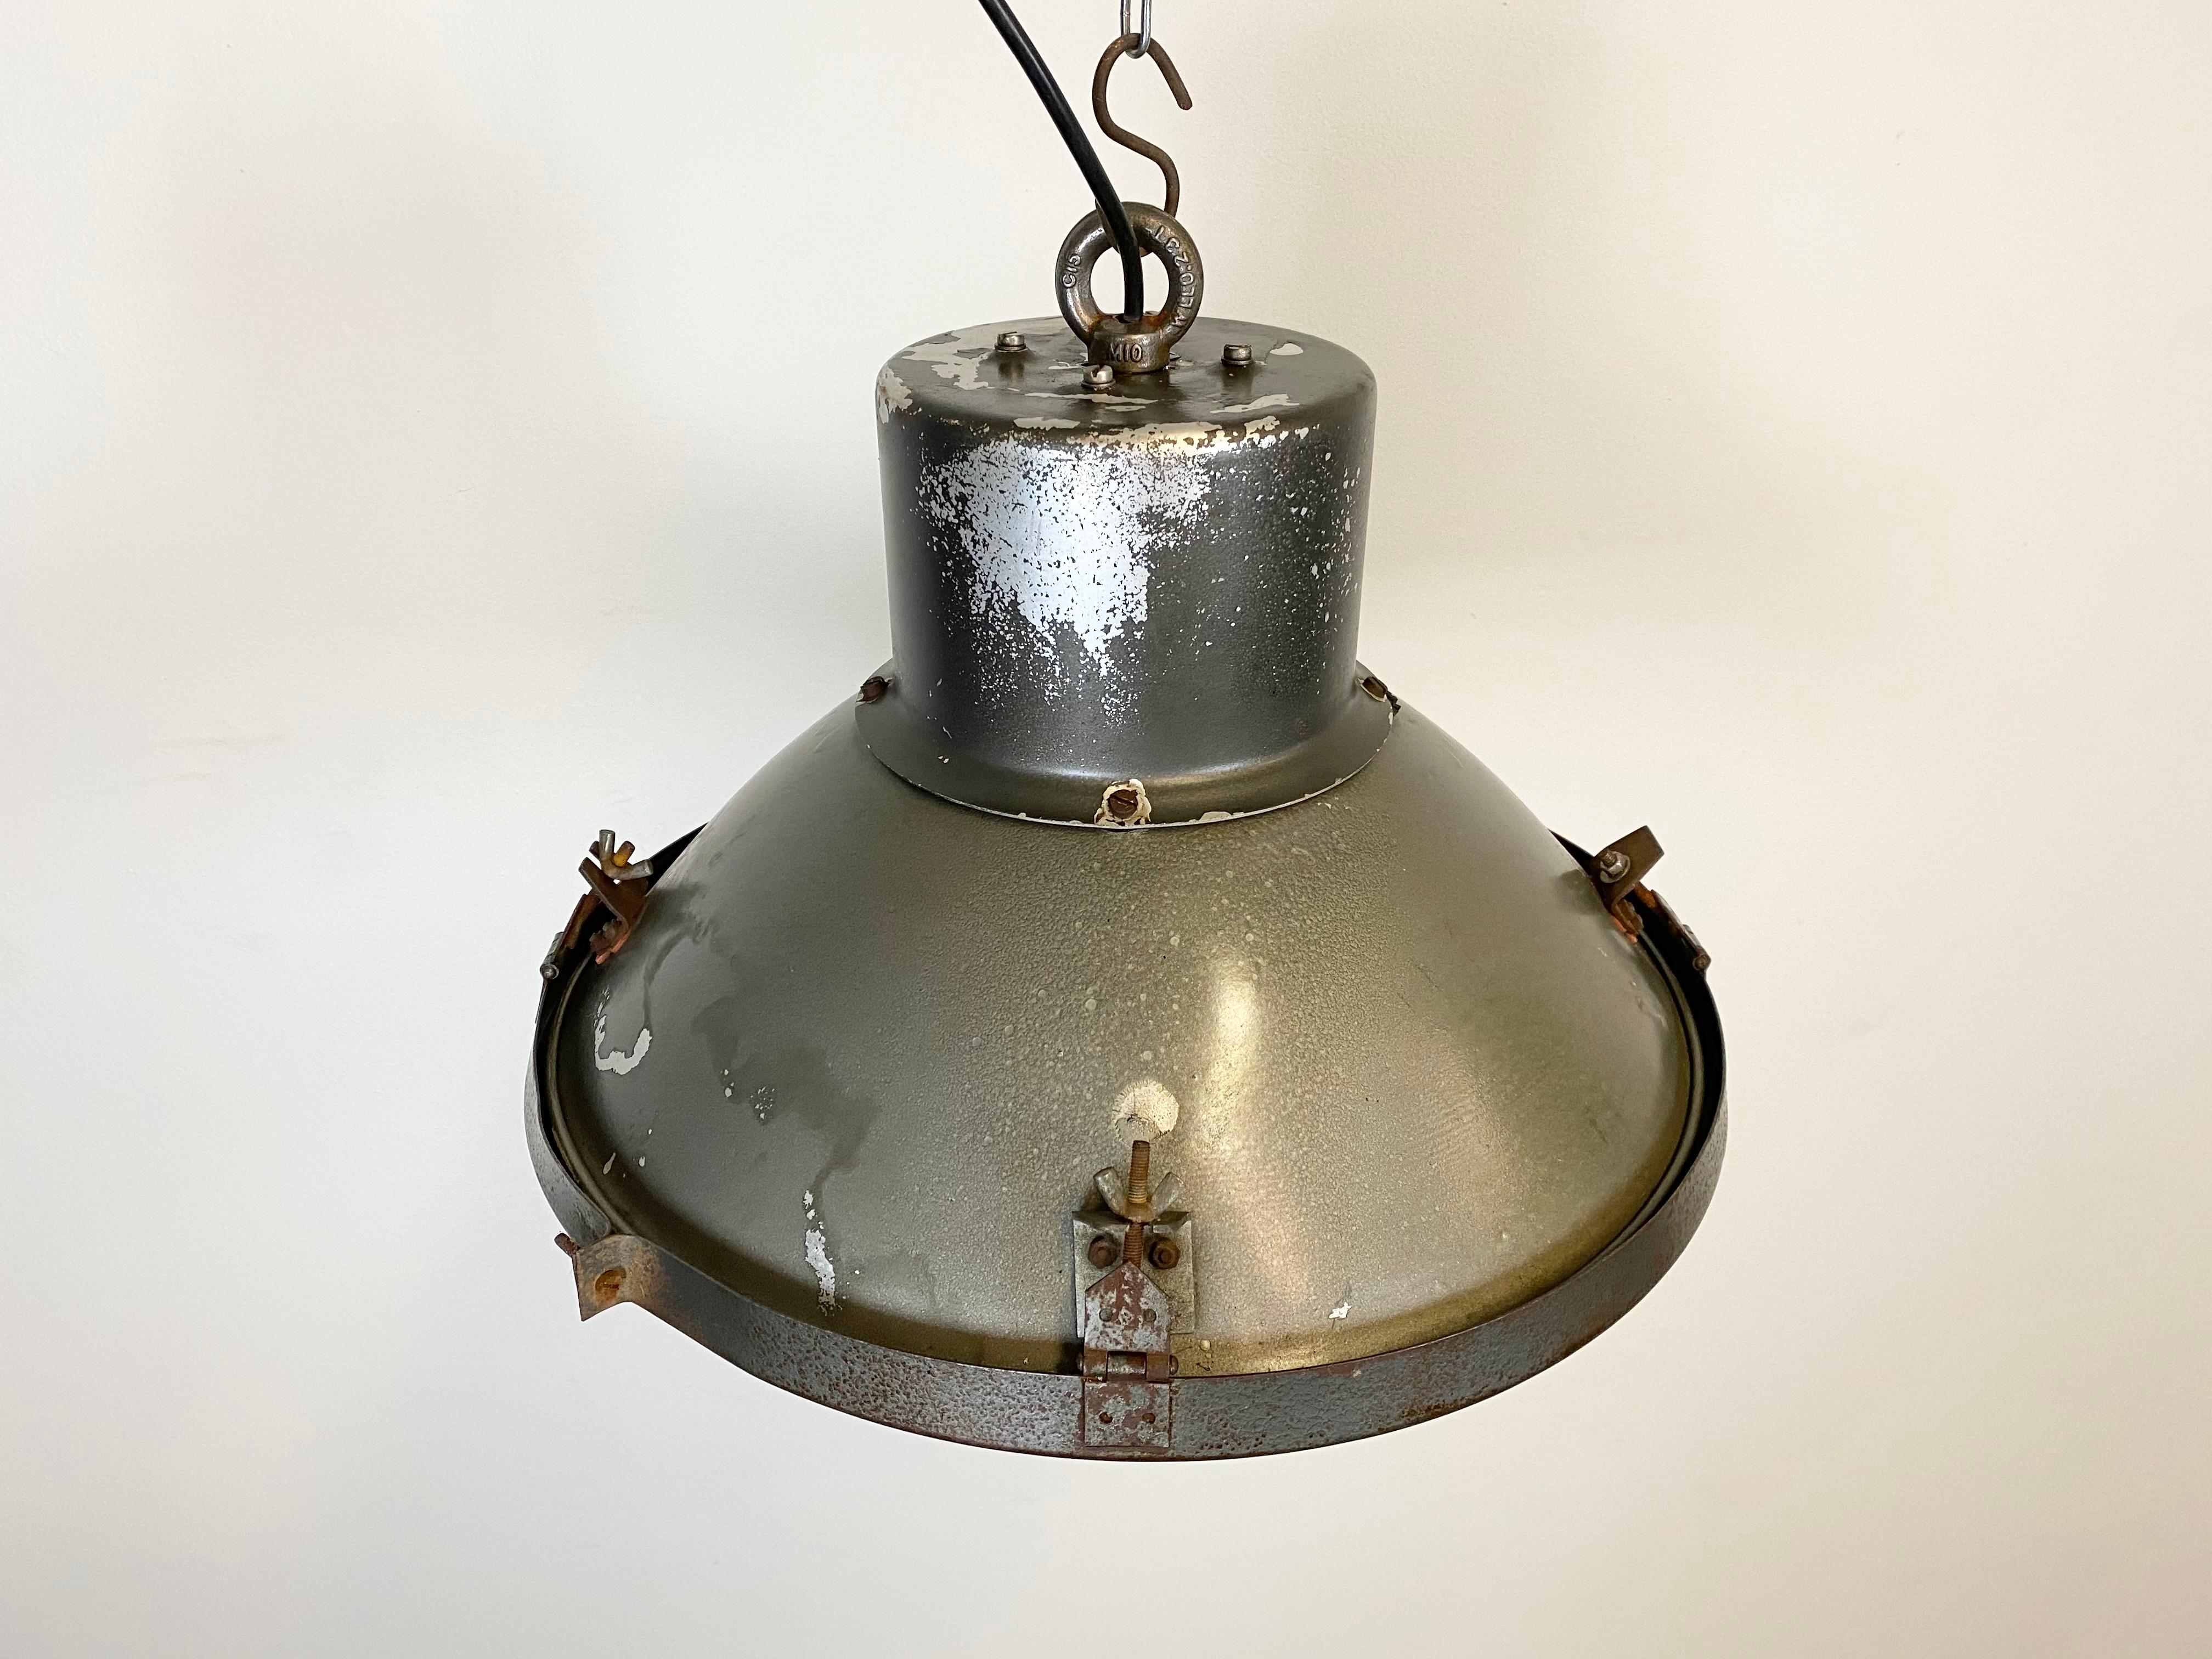 Czech Industrial Aluminum Factory Lamp with Glass Cover, 1960s For Sale